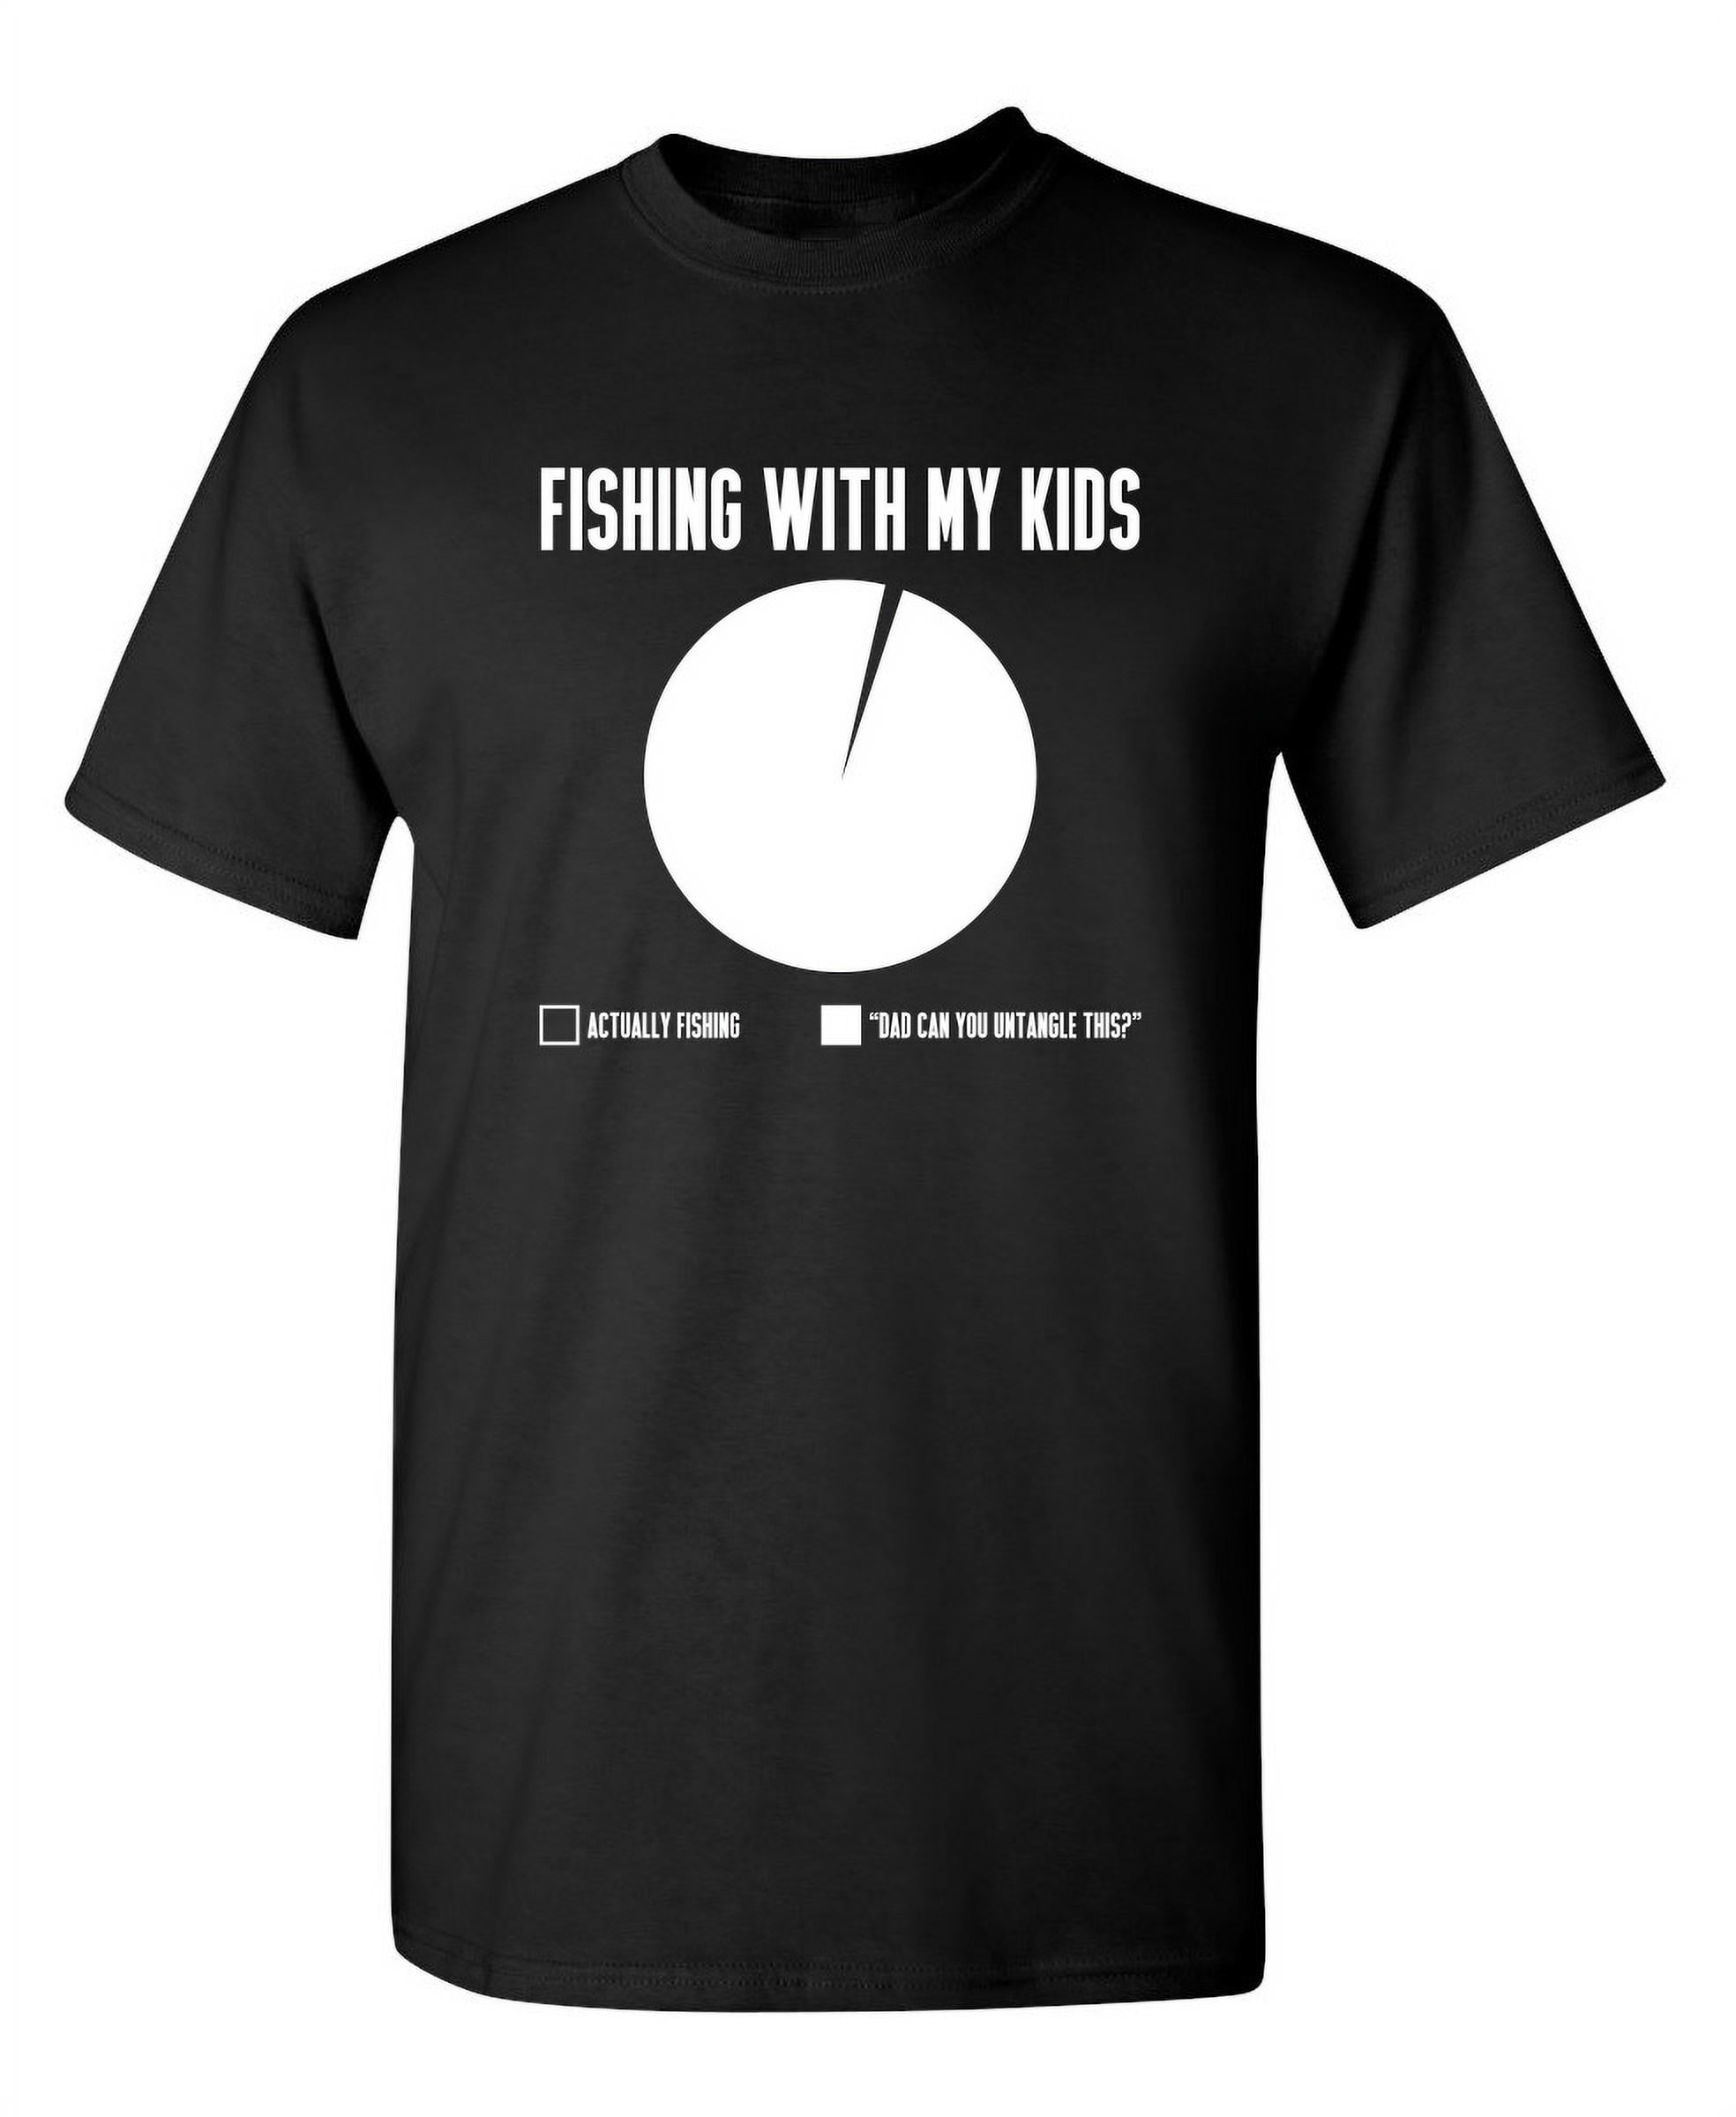 Fishing With My Kids Sarcastic Premium T Shirt Adult Humor Funny Saying  Graphic Tee For Xmas Pre Birthday Anniversary Gift Hilarious Novelty Tshirt  